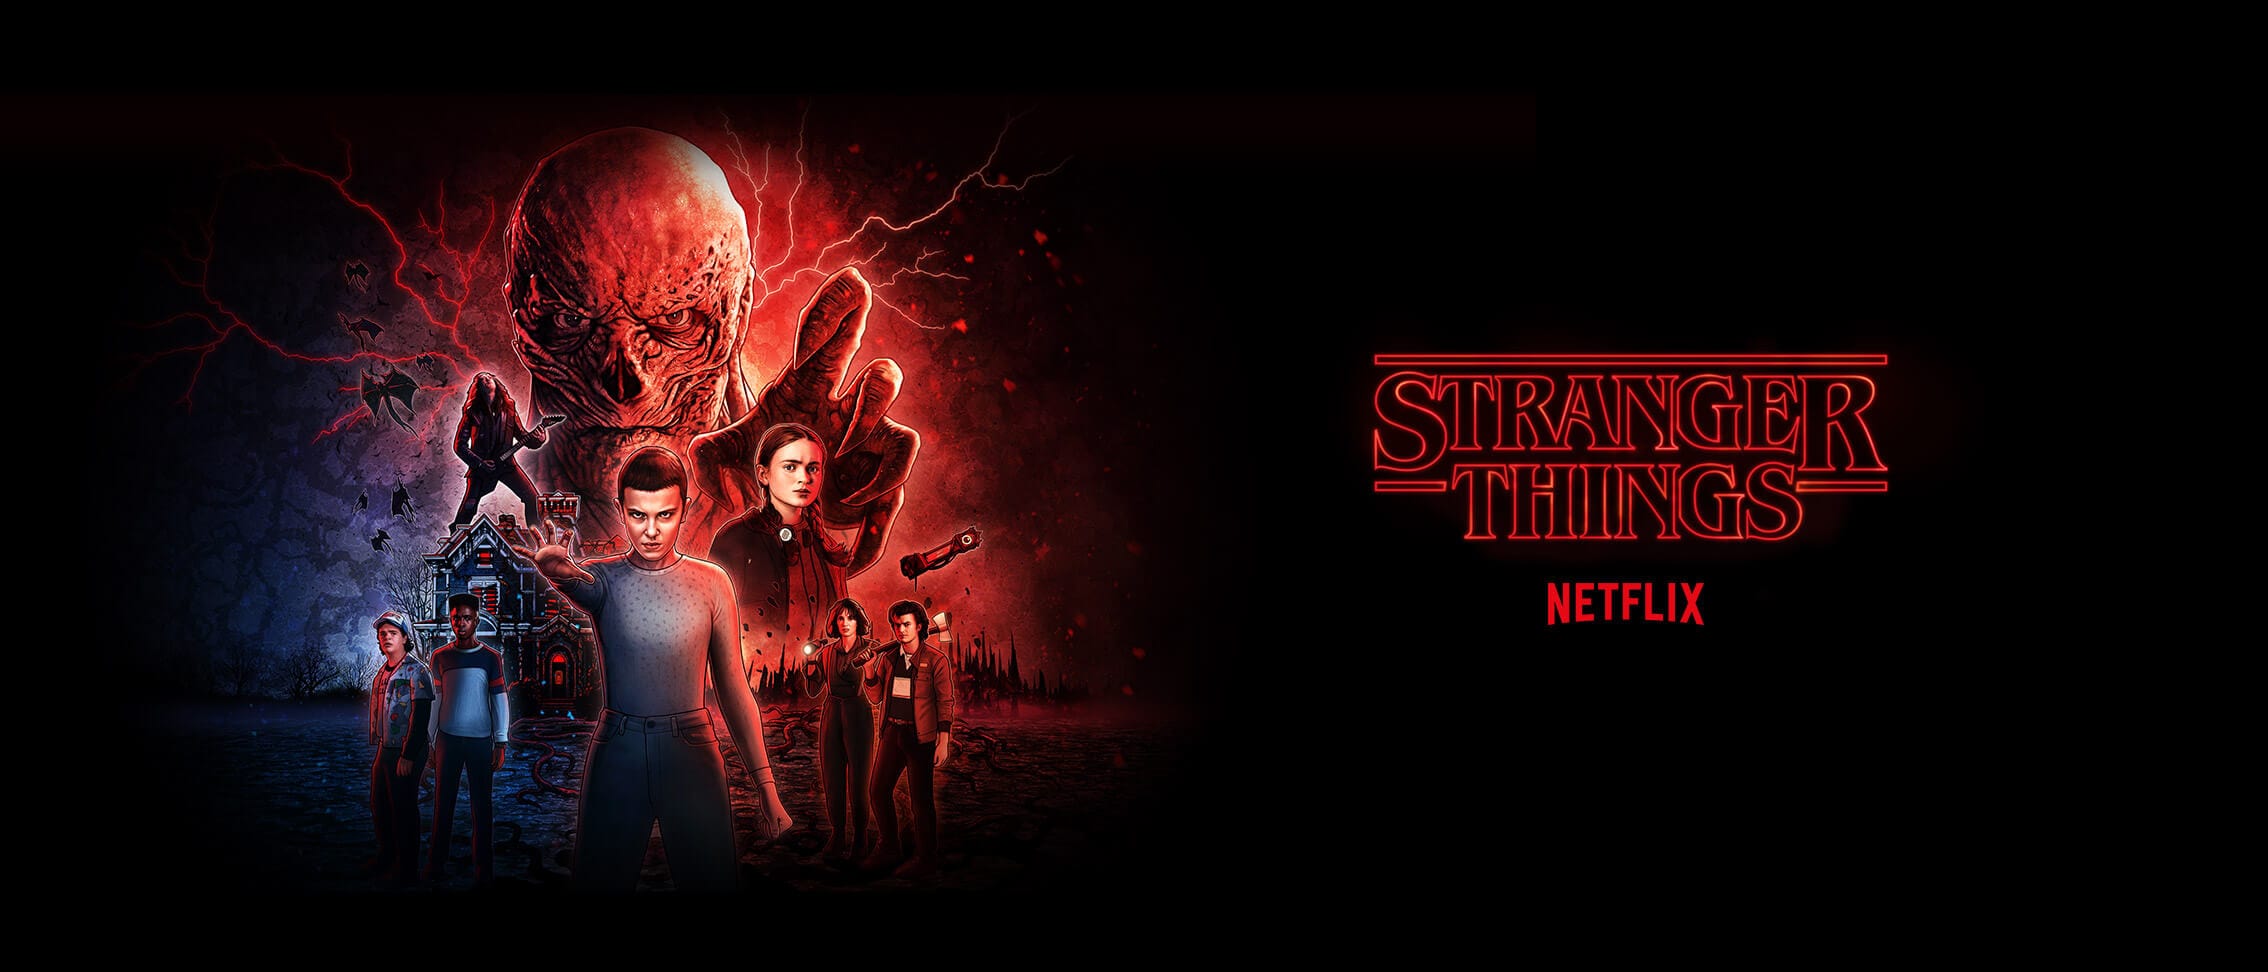 Graphic Stranger Things Netflix logo and characters standing in front of a house with Vecna, a glowing red monster looming.